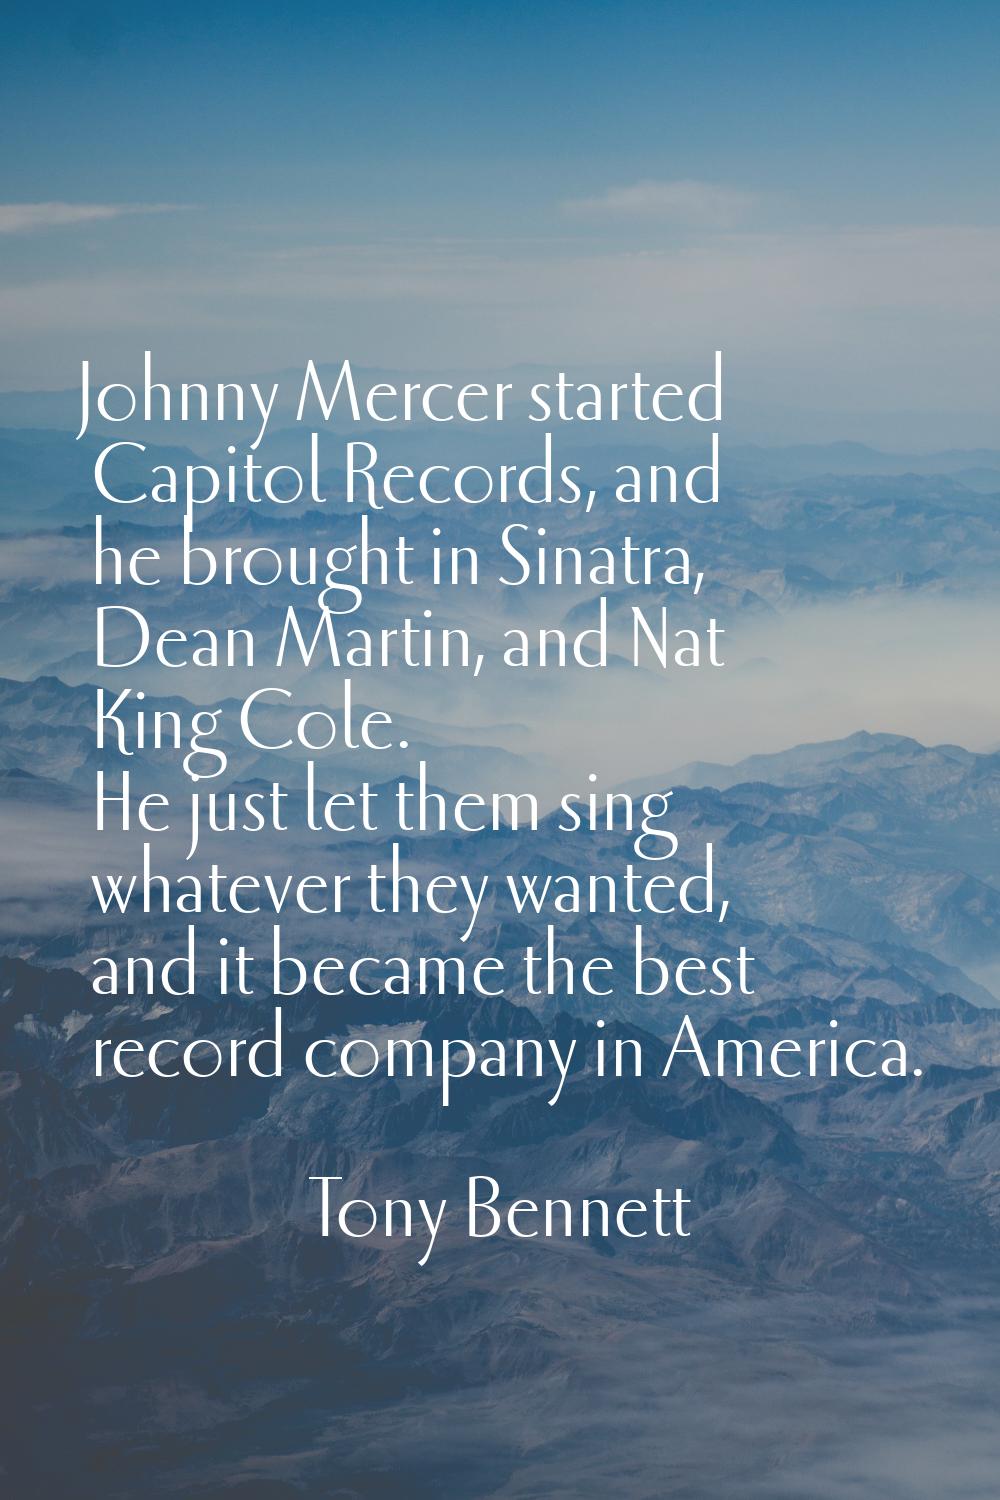 Johnny Mercer started Capitol Records, and he brought in Sinatra, Dean Martin, and Nat King Cole. H